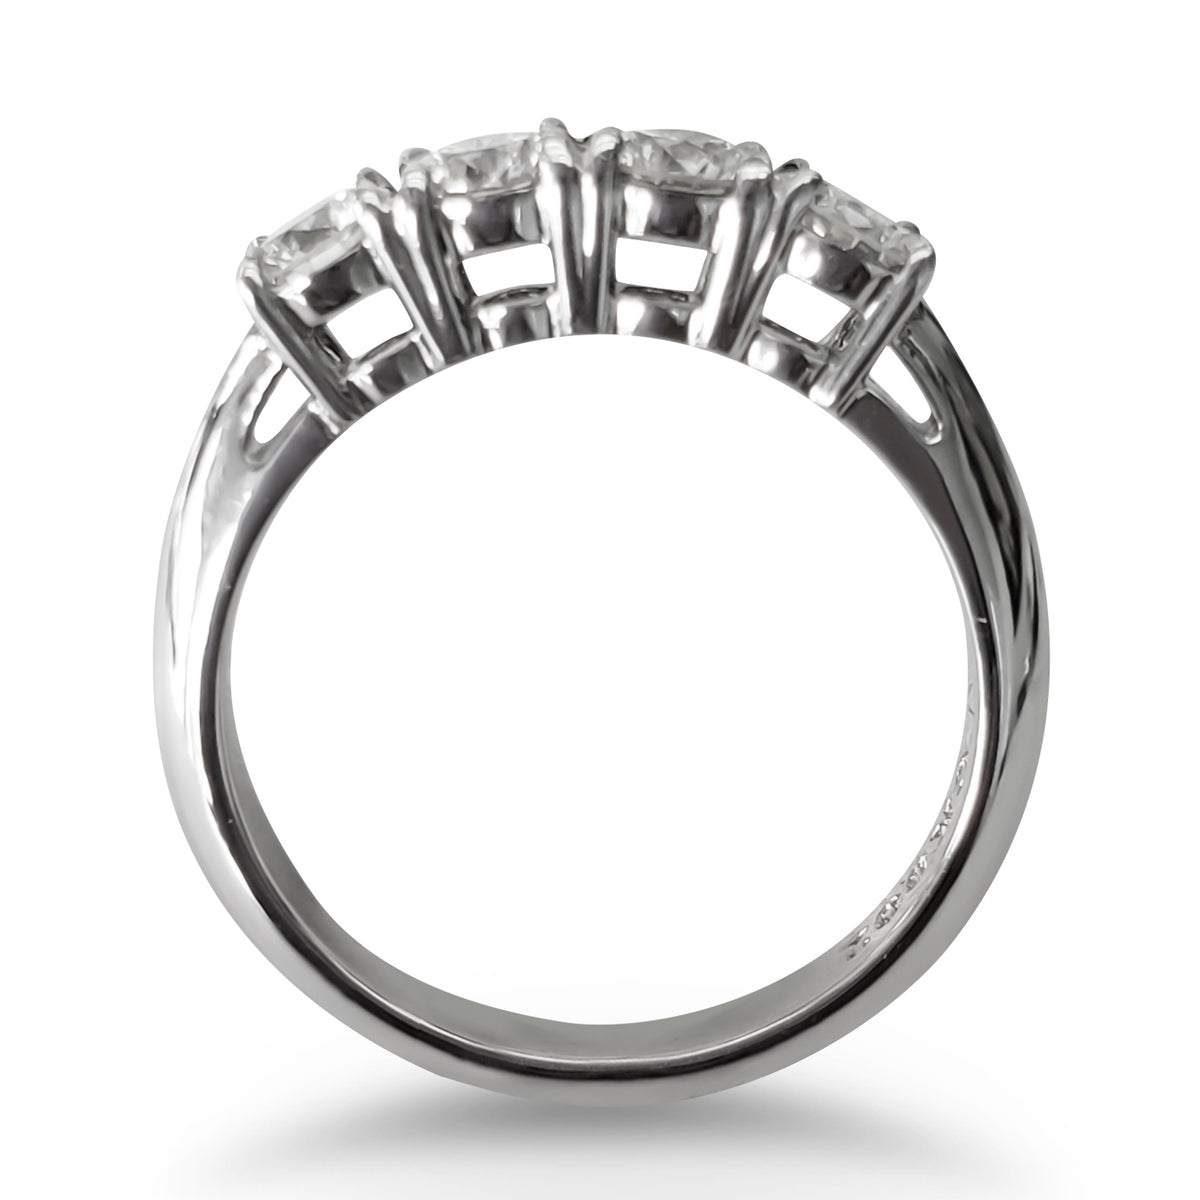 Diamond Band in Platinum with Approximately 0.70 Carat Total Weight